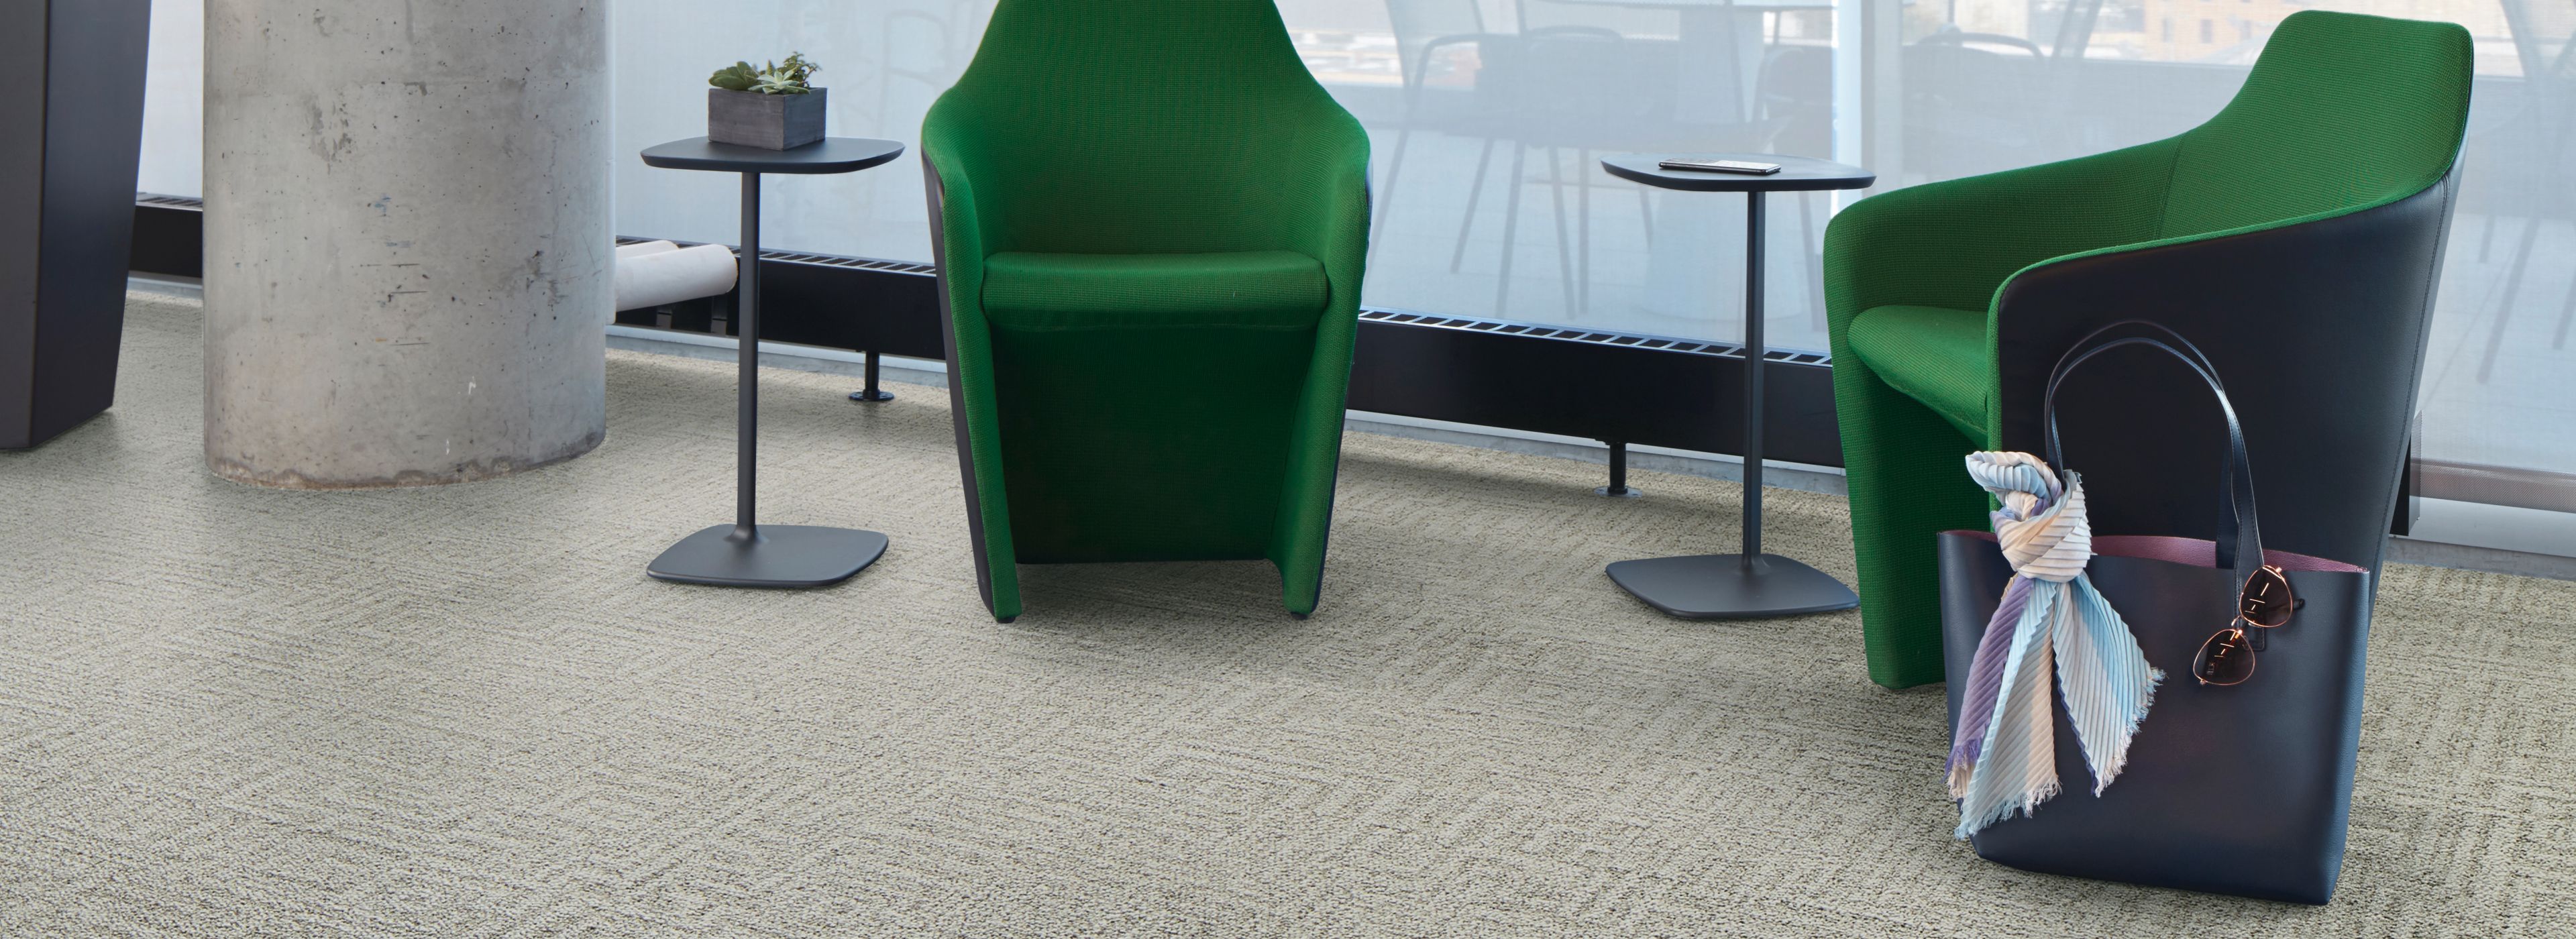 Interface Open Air 413 carpet tile in lounge space with green chairs and cement column image number 1